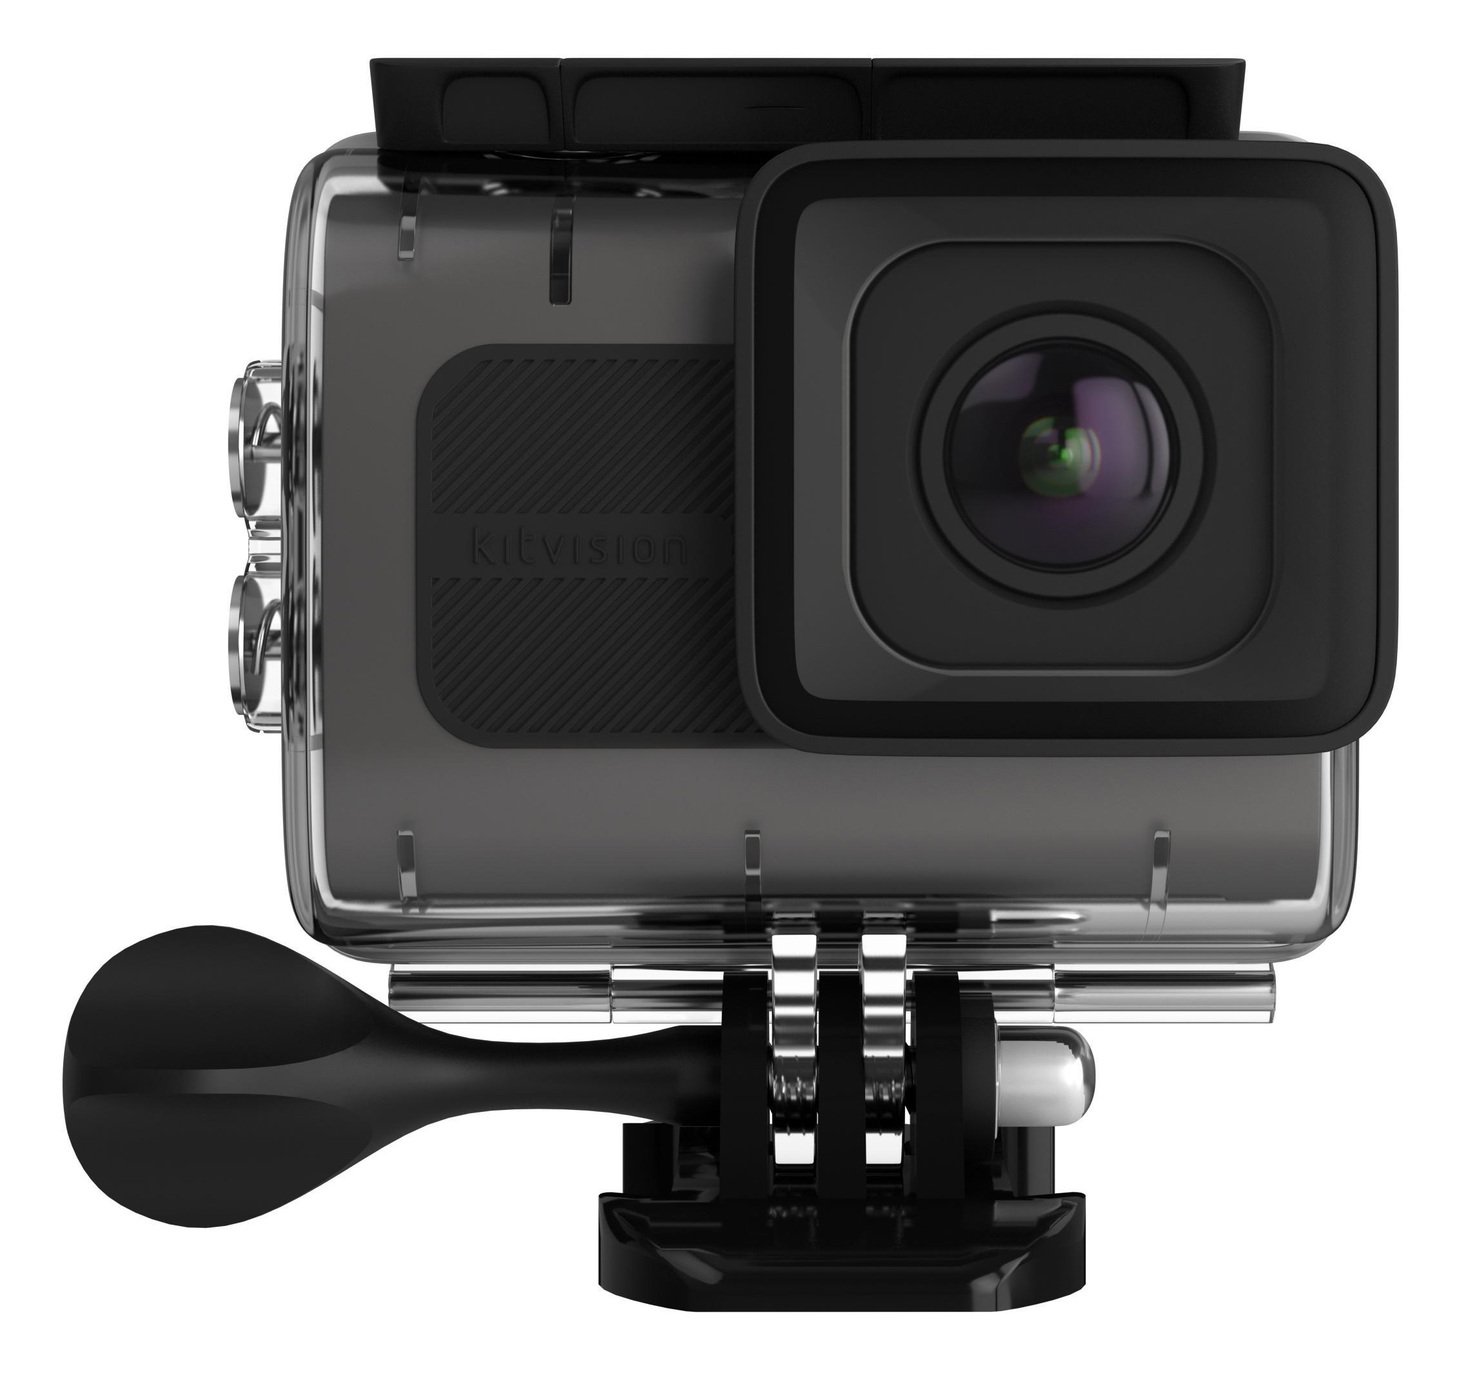 Kitvision Venture 1080P Action Camera with Wi-Fi Review